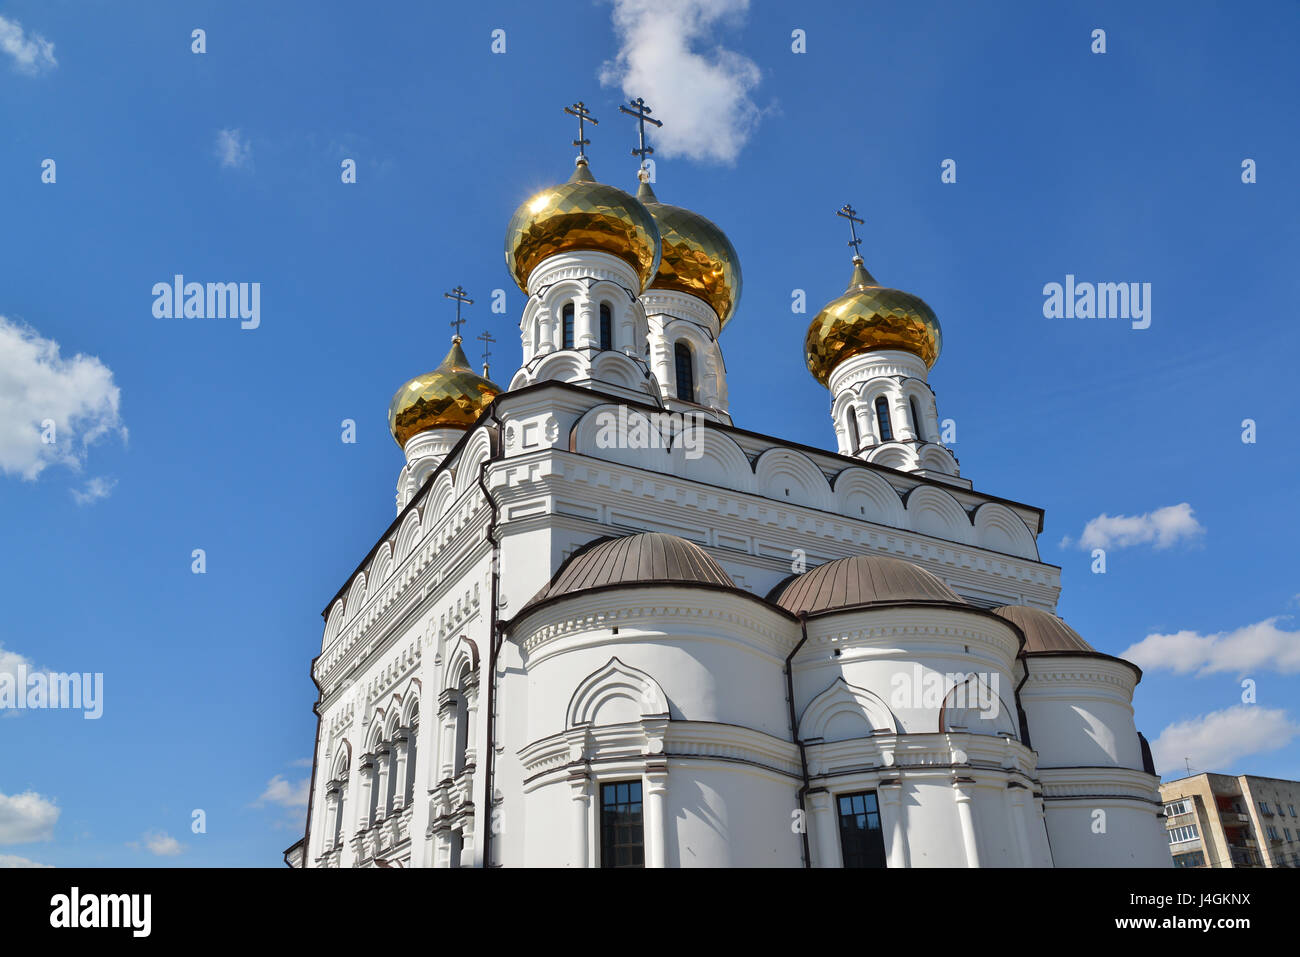 Church of Alexander Nevsky in a Tver, Russia Stock Photo